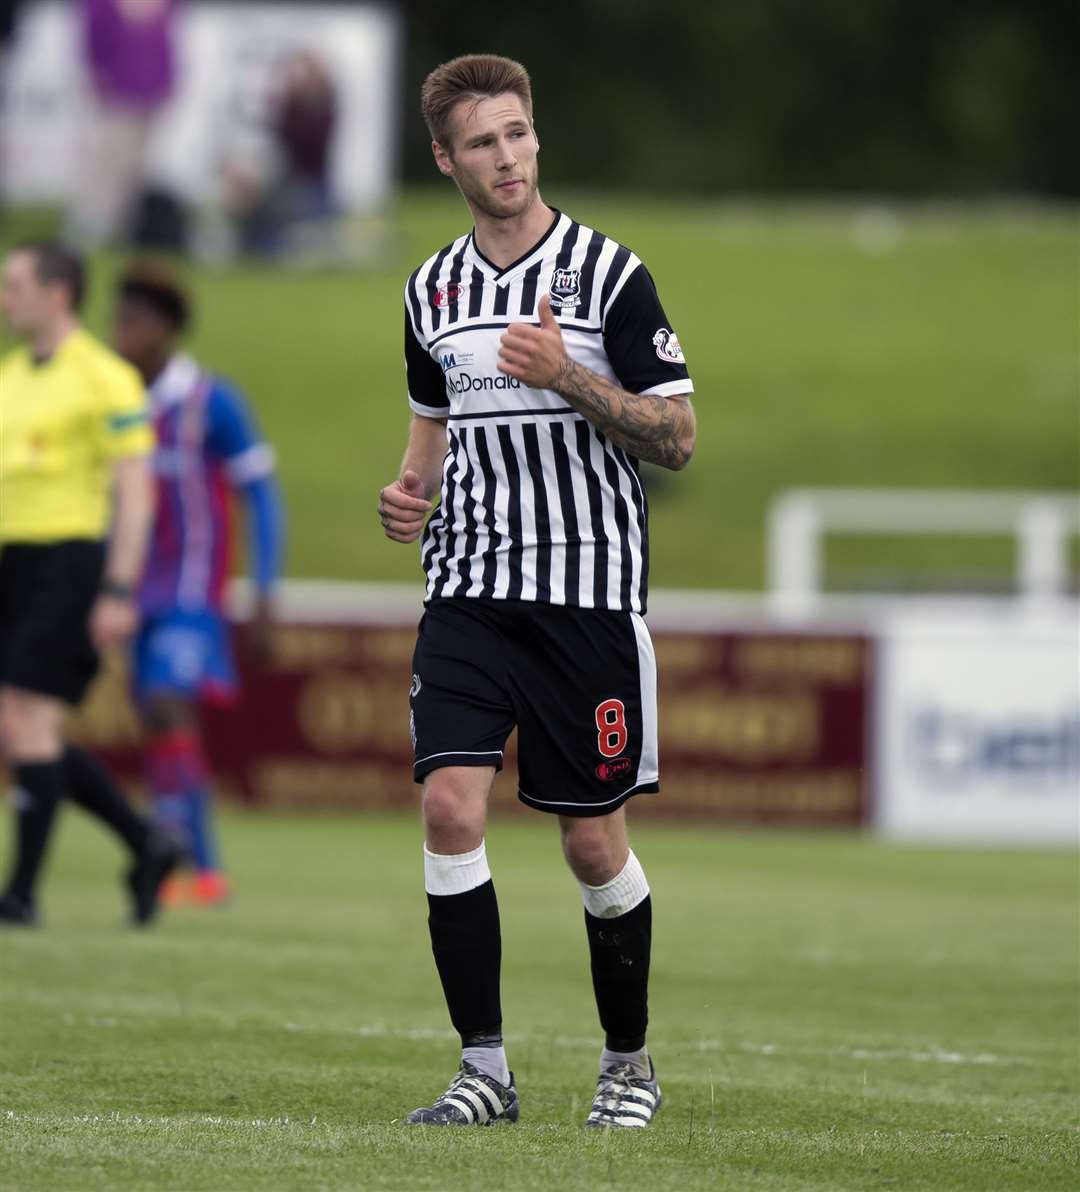 Brian Cameron is closing in on 500 Elgin City appearances and 100 goals.